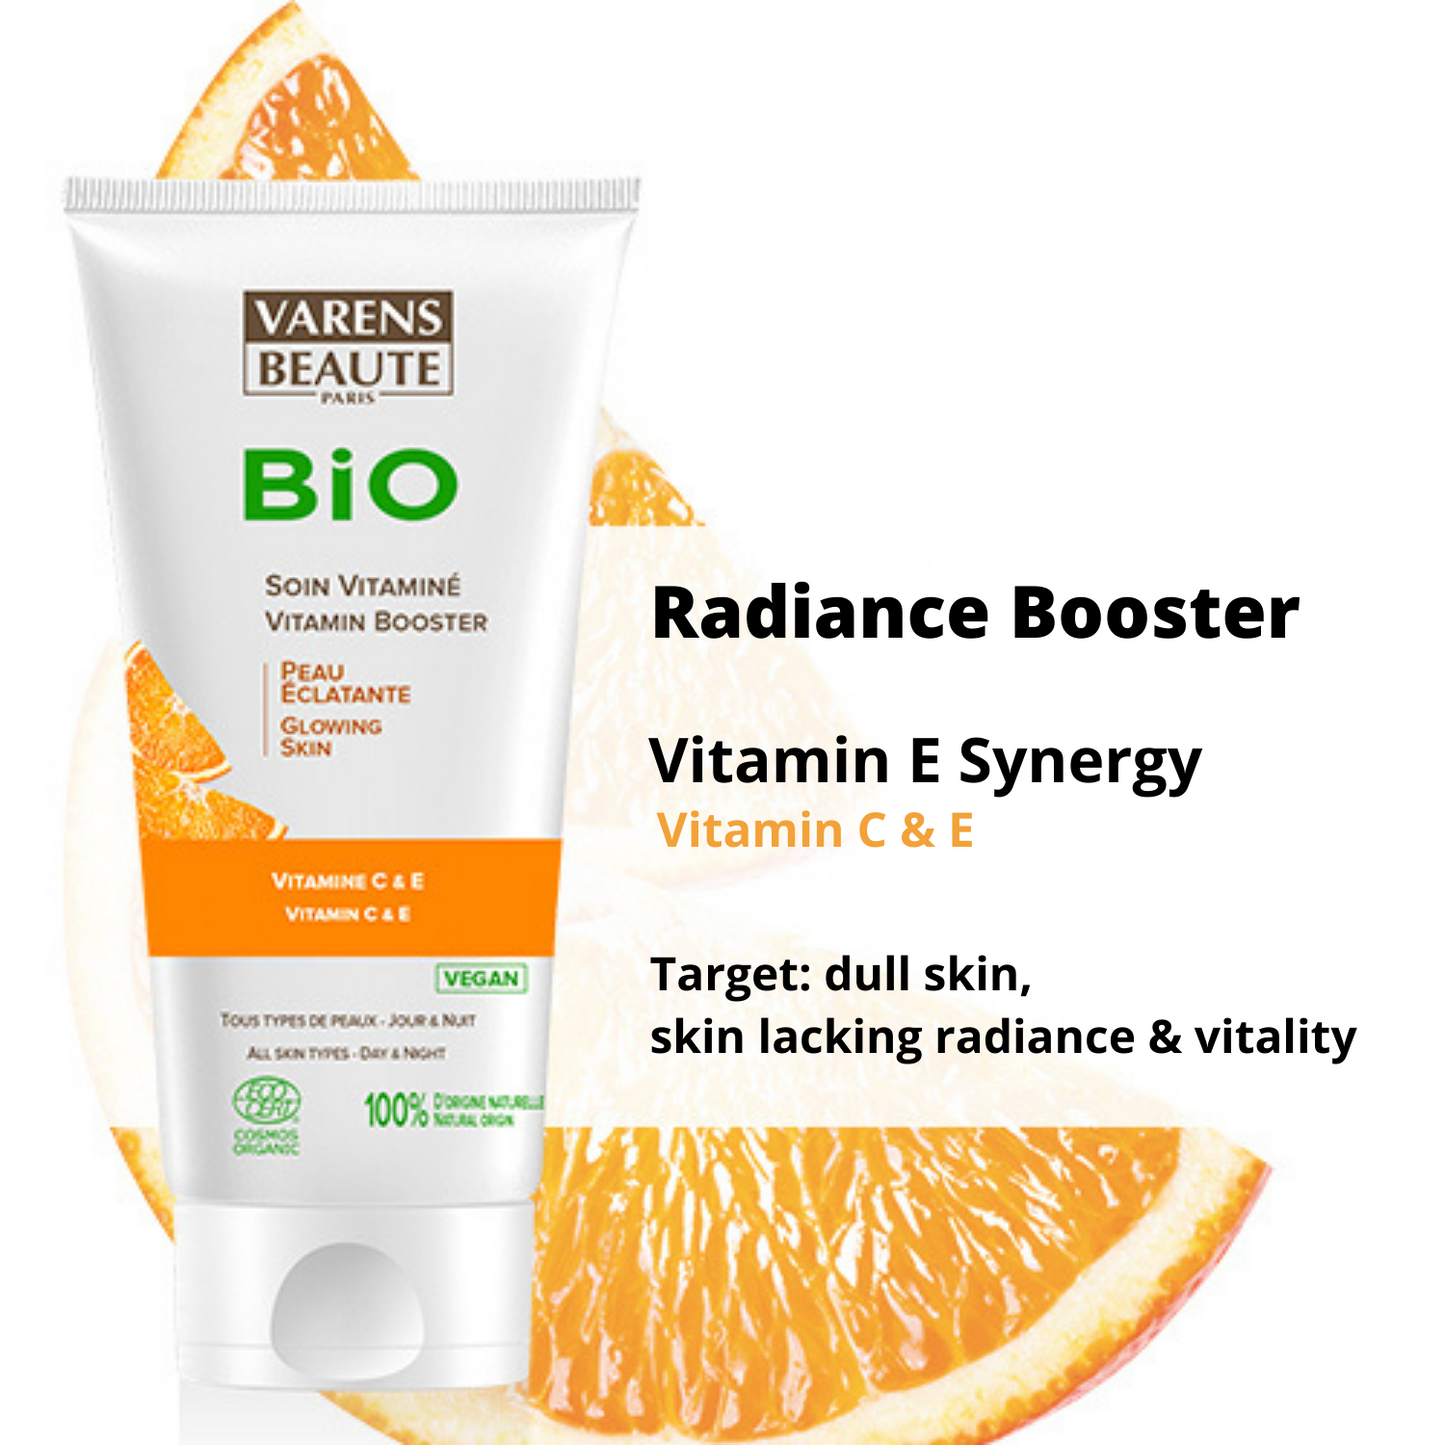 Varens Beaute Vitamin Booster - 100% Vegan - Cruelty Free - Protect Skin From Free Radicals and Stimulate Cell Renewal for a Healthy Glow - Radiant and Regenerated Skin - Made With Antioxidants and Vitamins - All Skin Types - 1.35 Fl Oz